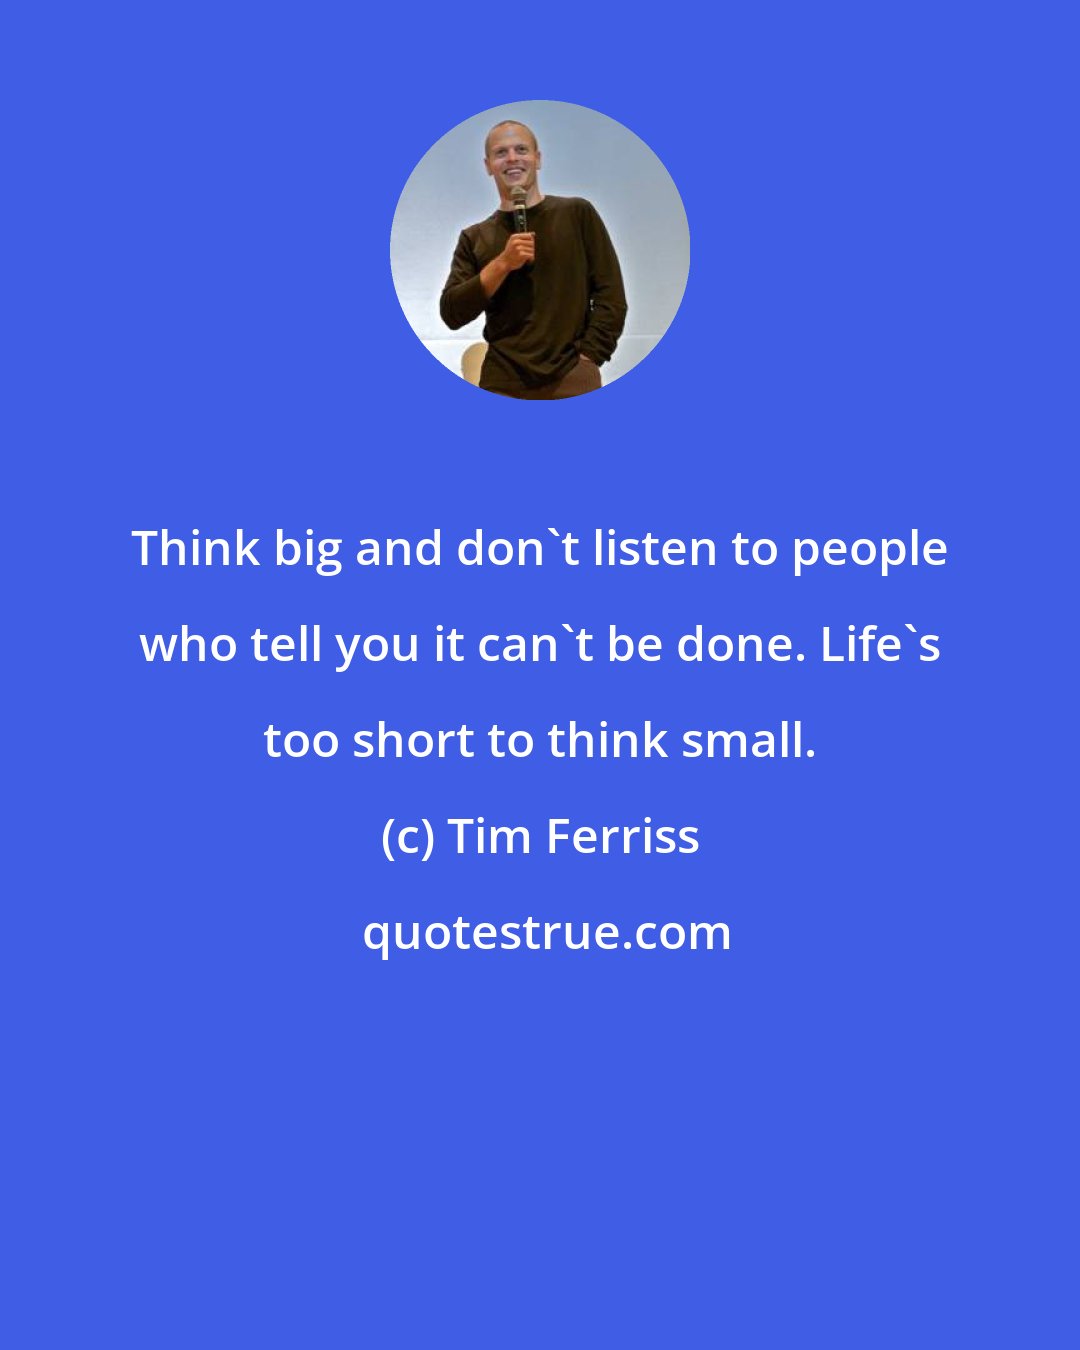 Tim Ferriss: Think big and don't listen to people who tell you it can't be done. Life's too short to think small.